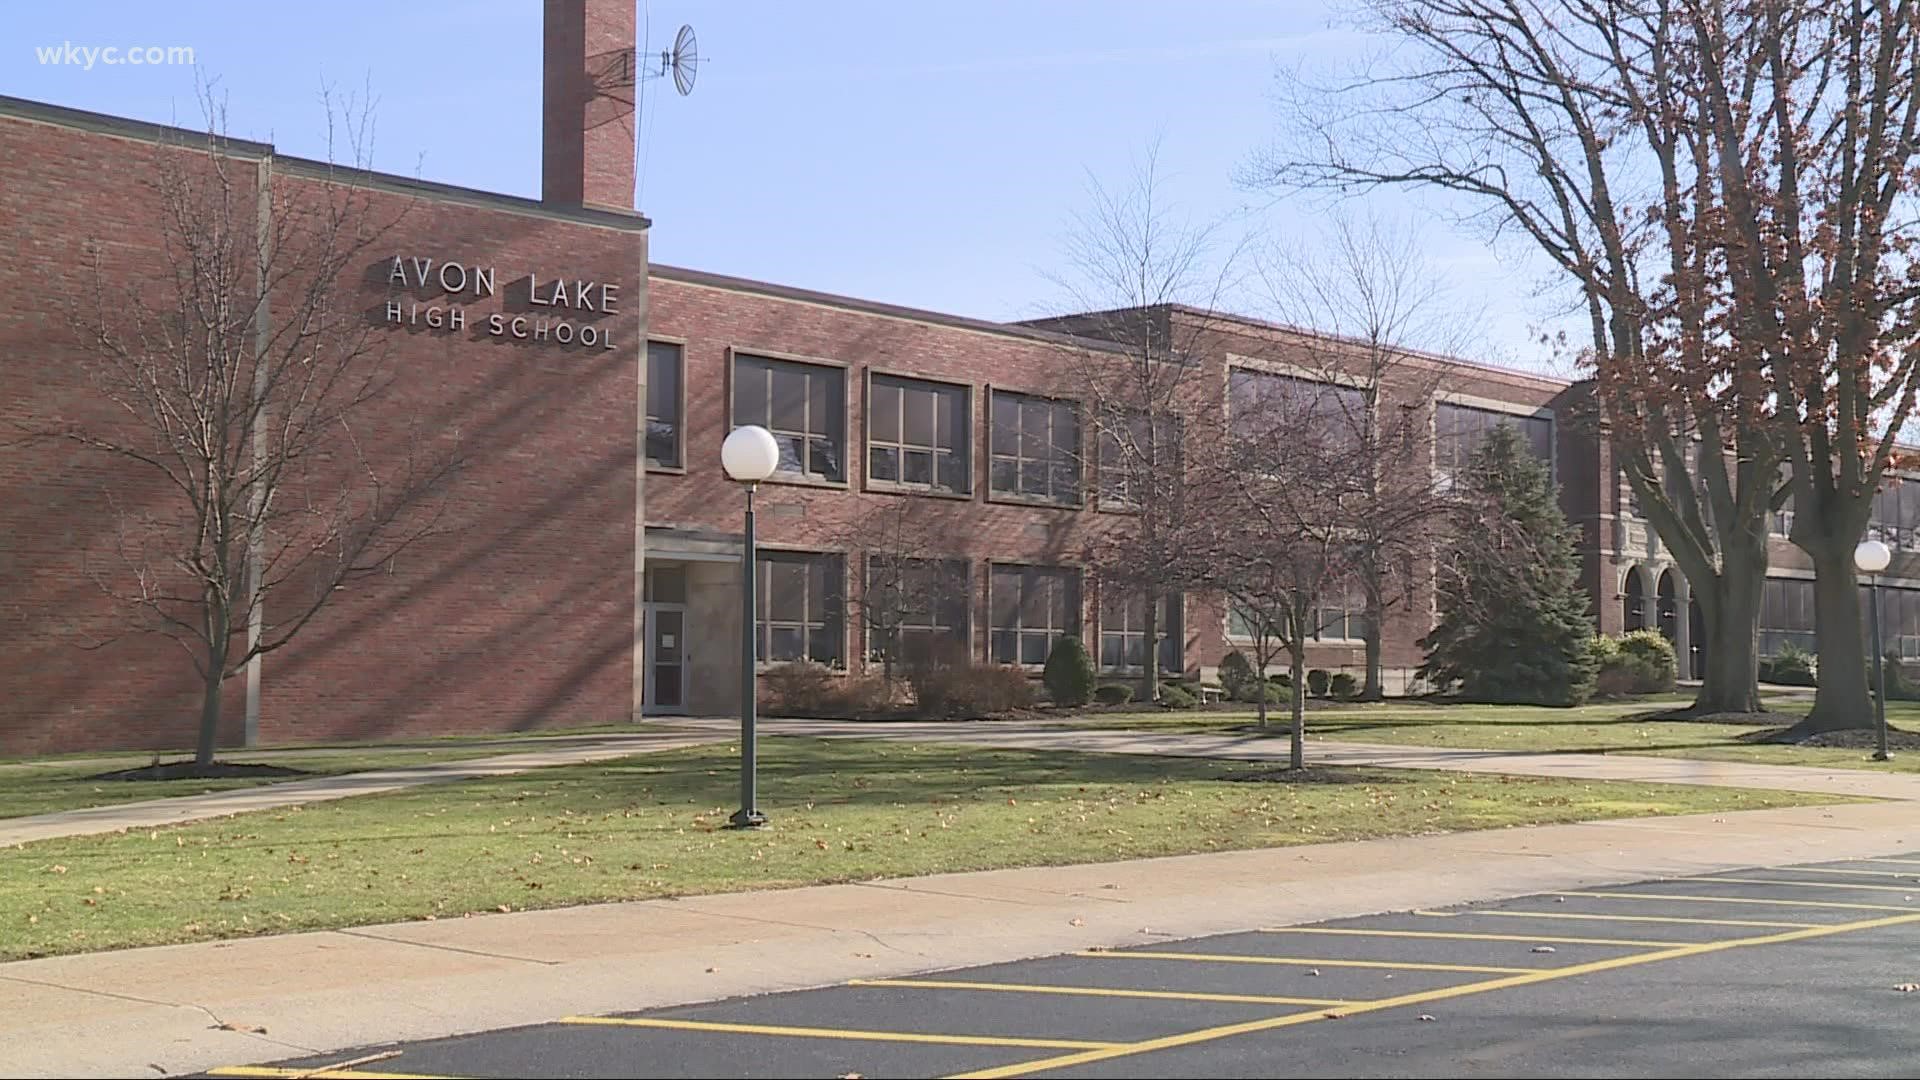 Some parents are not happy with the implementation of a mask mandate at Avon Lake City Schools. Isabel Lawrence has more from both sides of the debate.